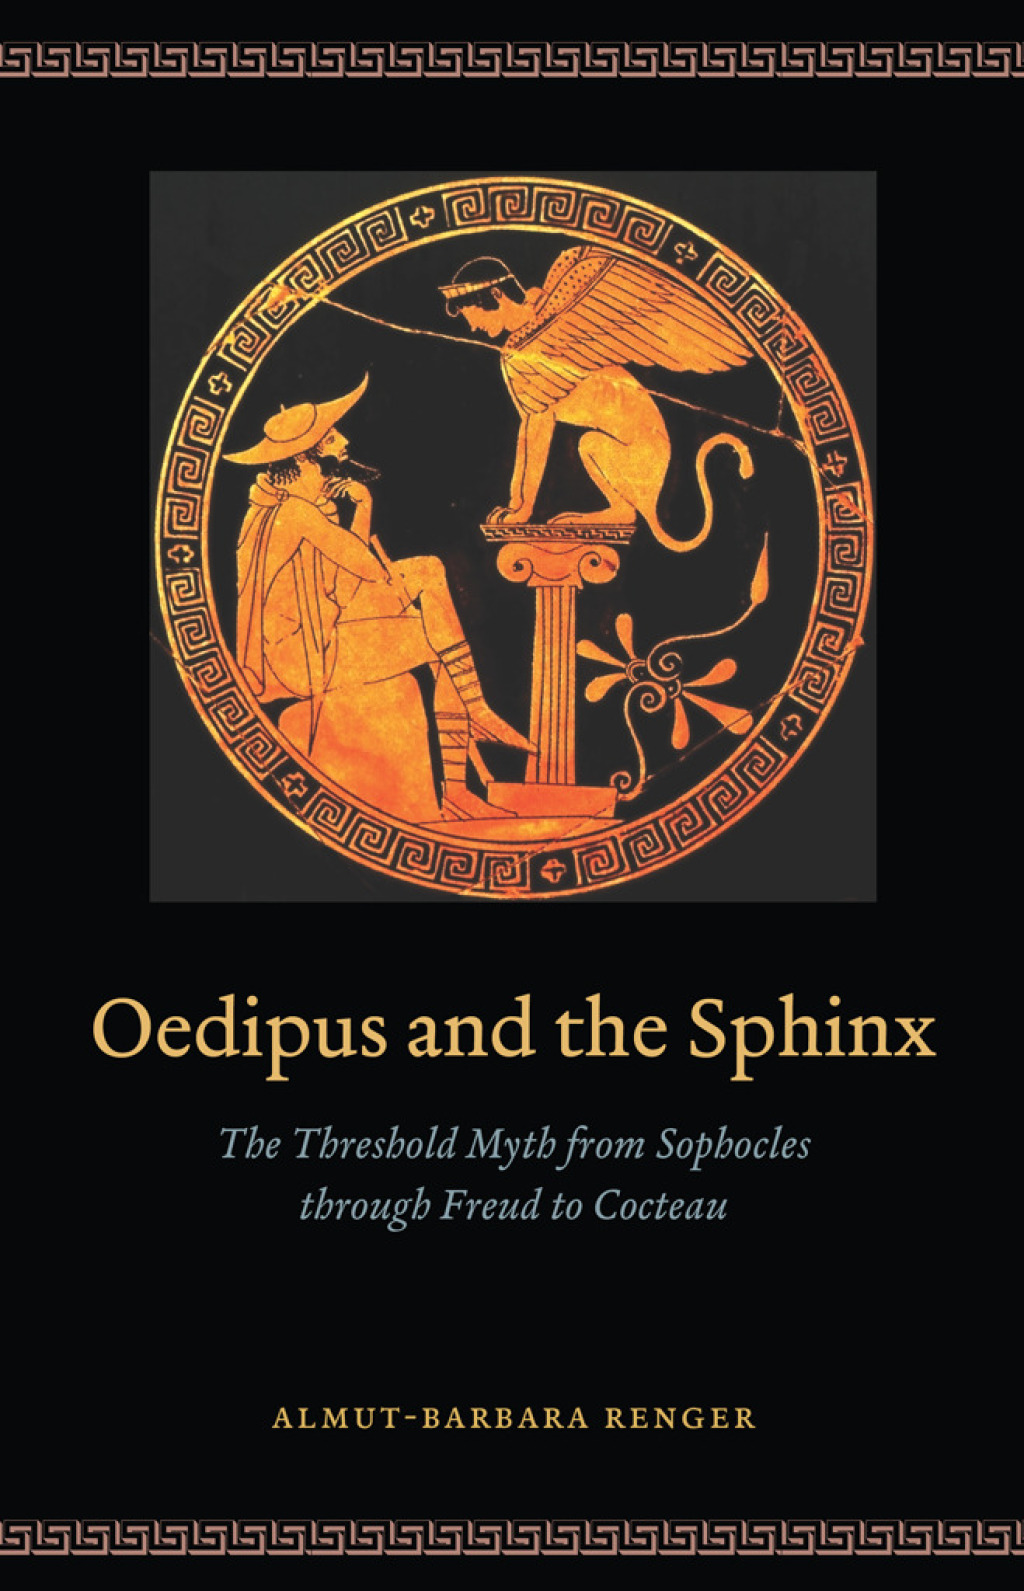 Oedipus and the Sphinx (eBook) - Almut-Barbara Renger